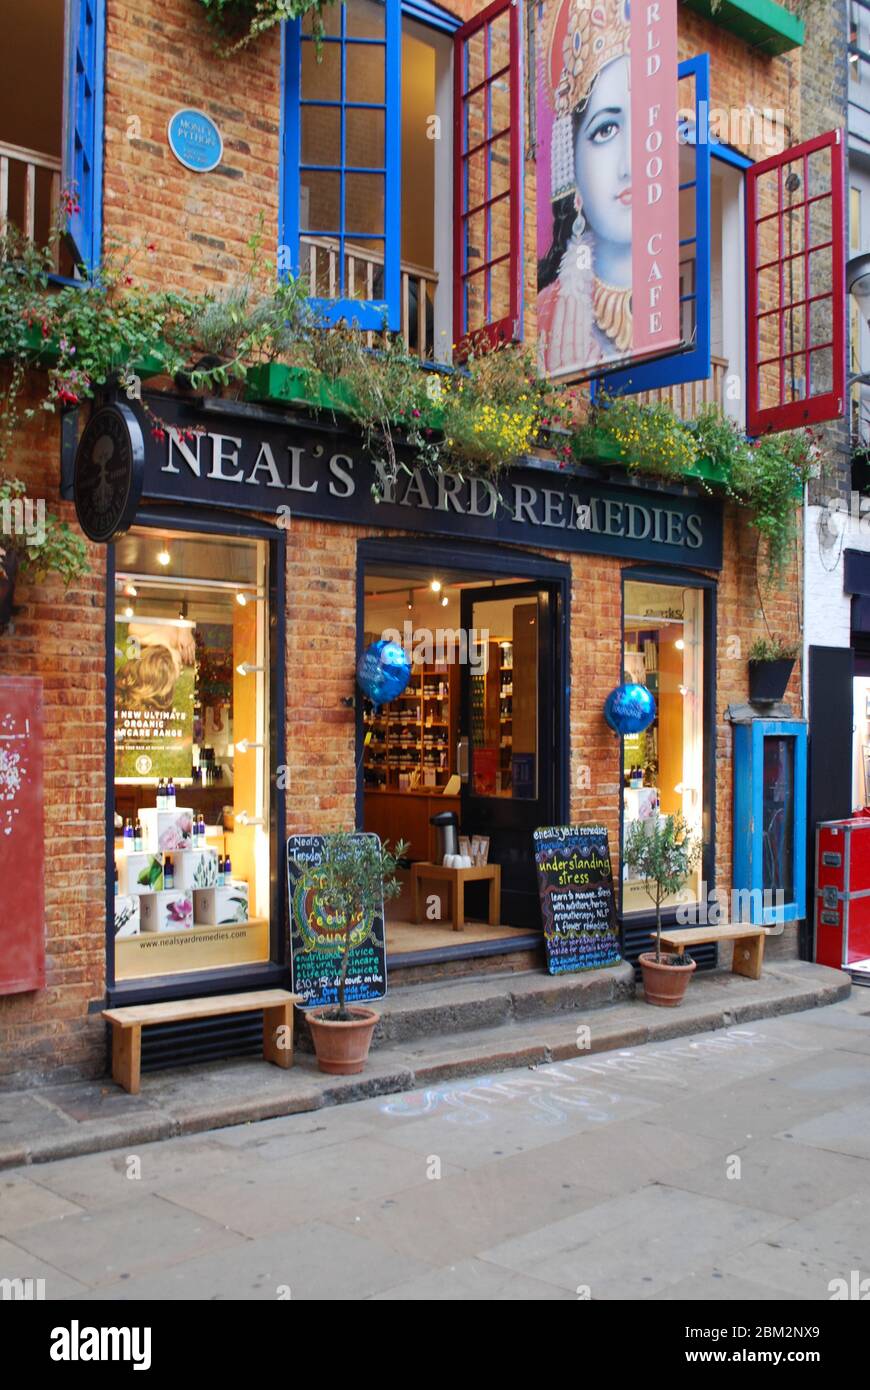 Health & Well Being Stores Natural Remedies in Neals Yard, London, WC2H 9DP Stock Photo